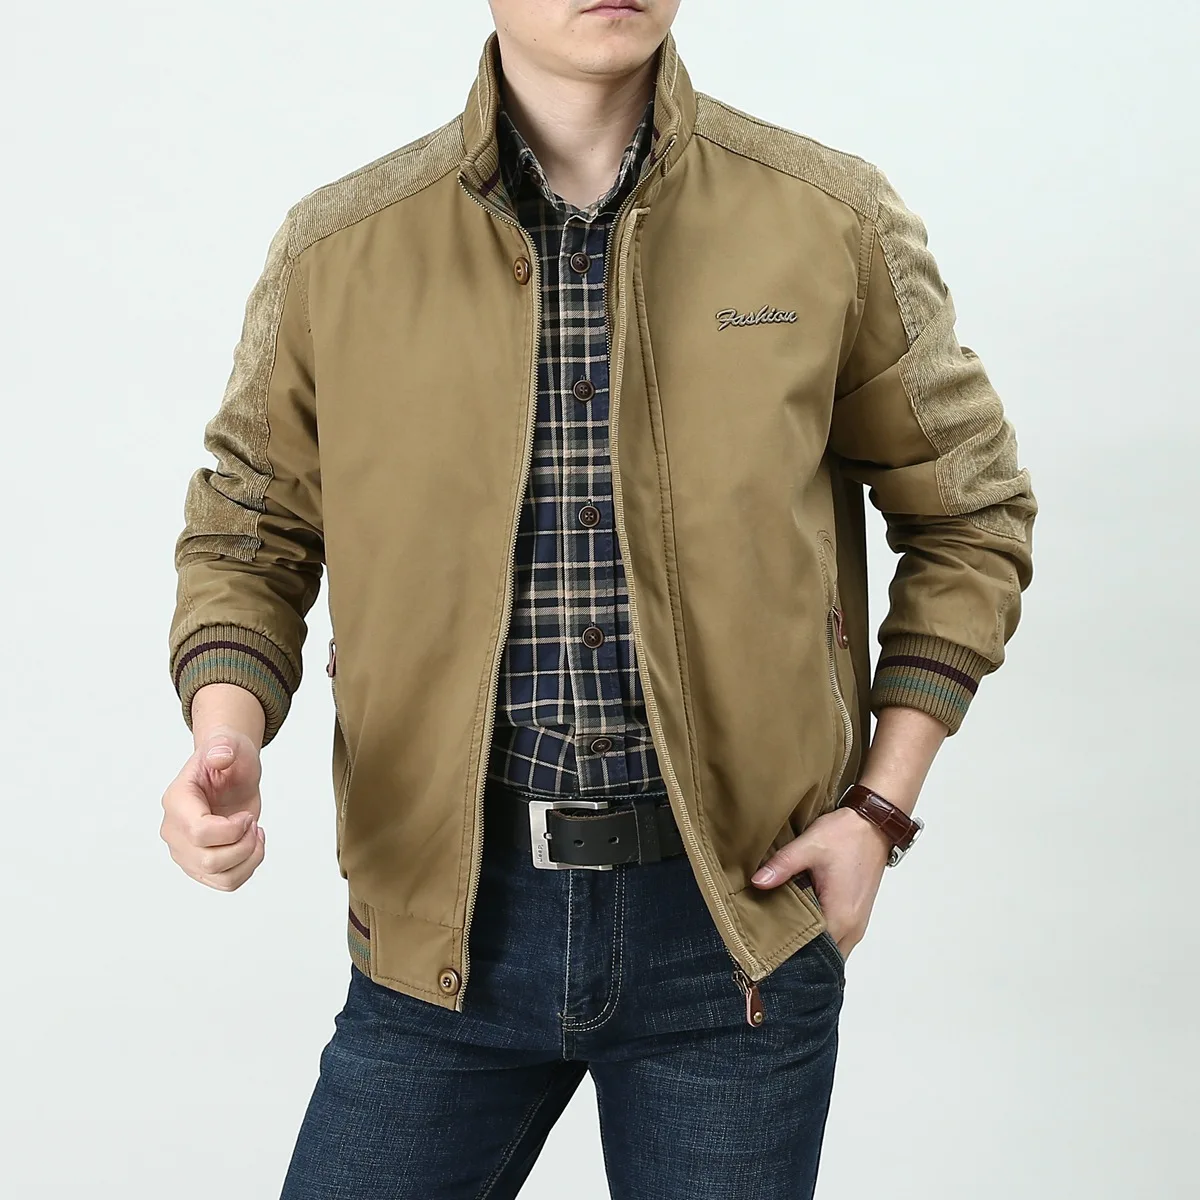 High Quality Jacket Male 96% Cotton Spring Autumn Loose Large Size 5XL Jacket Middle Aged Men'S Casual Wear Winter Clothes